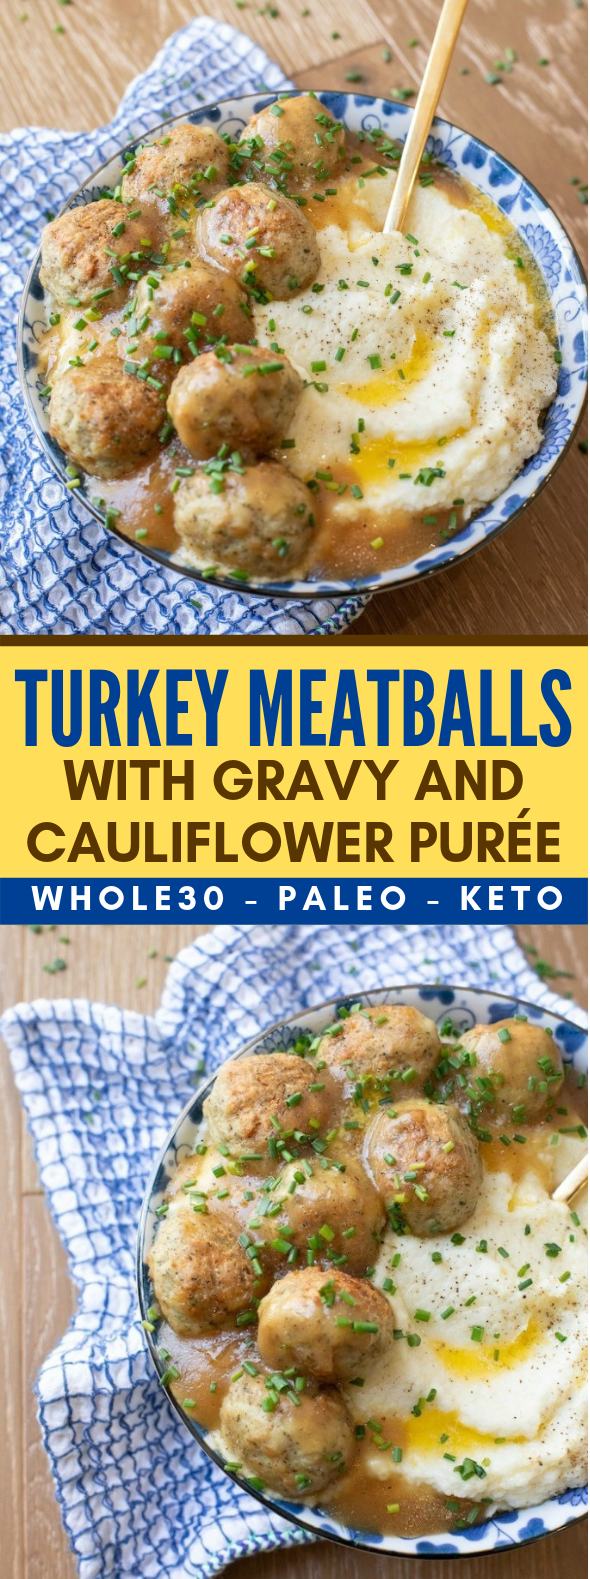 TURKEY MEATBALLS WITH GRAVY AND CAULIFLOWER PURÉE (WHOLE30-PALEO-KETO) #healthy #diet